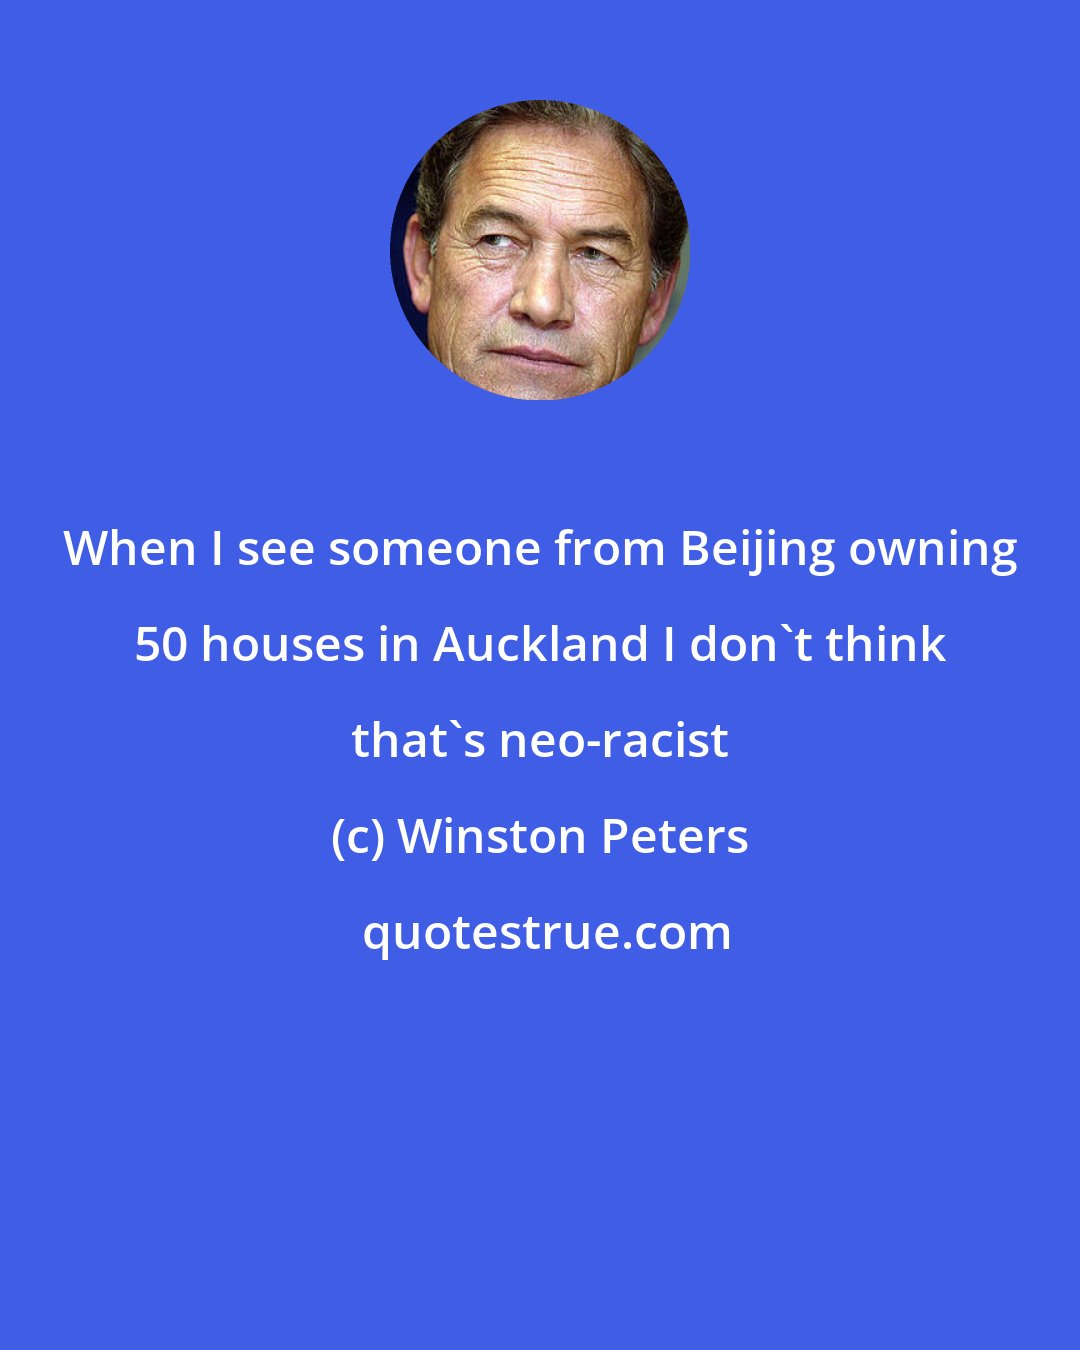 Winston Peters: When I see someone from Beijing owning 50 houses in Auckland I don't think that's neo-racist